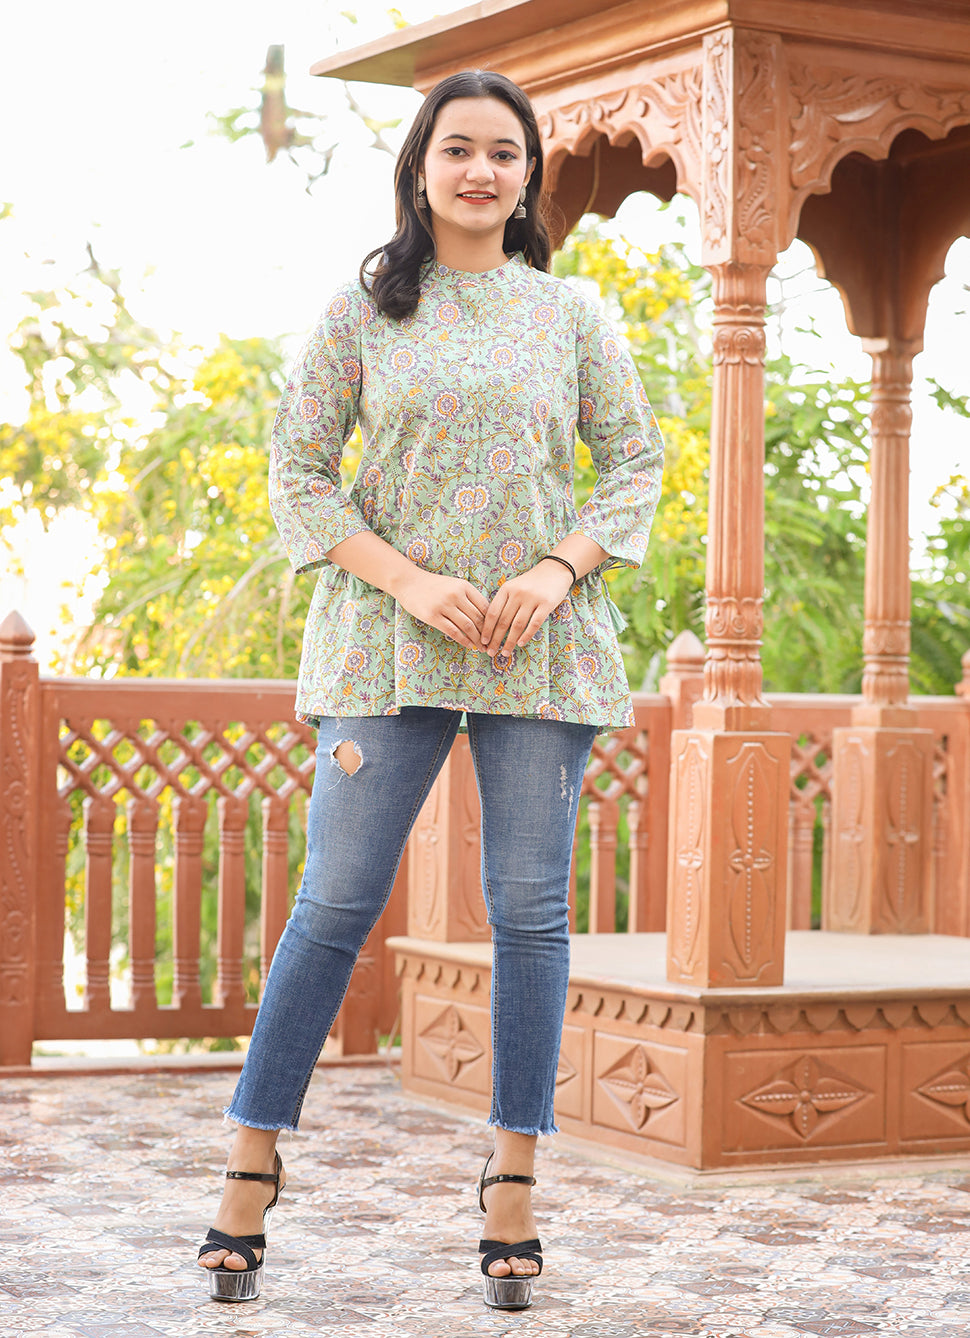 Buy Green Floral Cotton Top | Best Tunic Tops for Women Online in India 